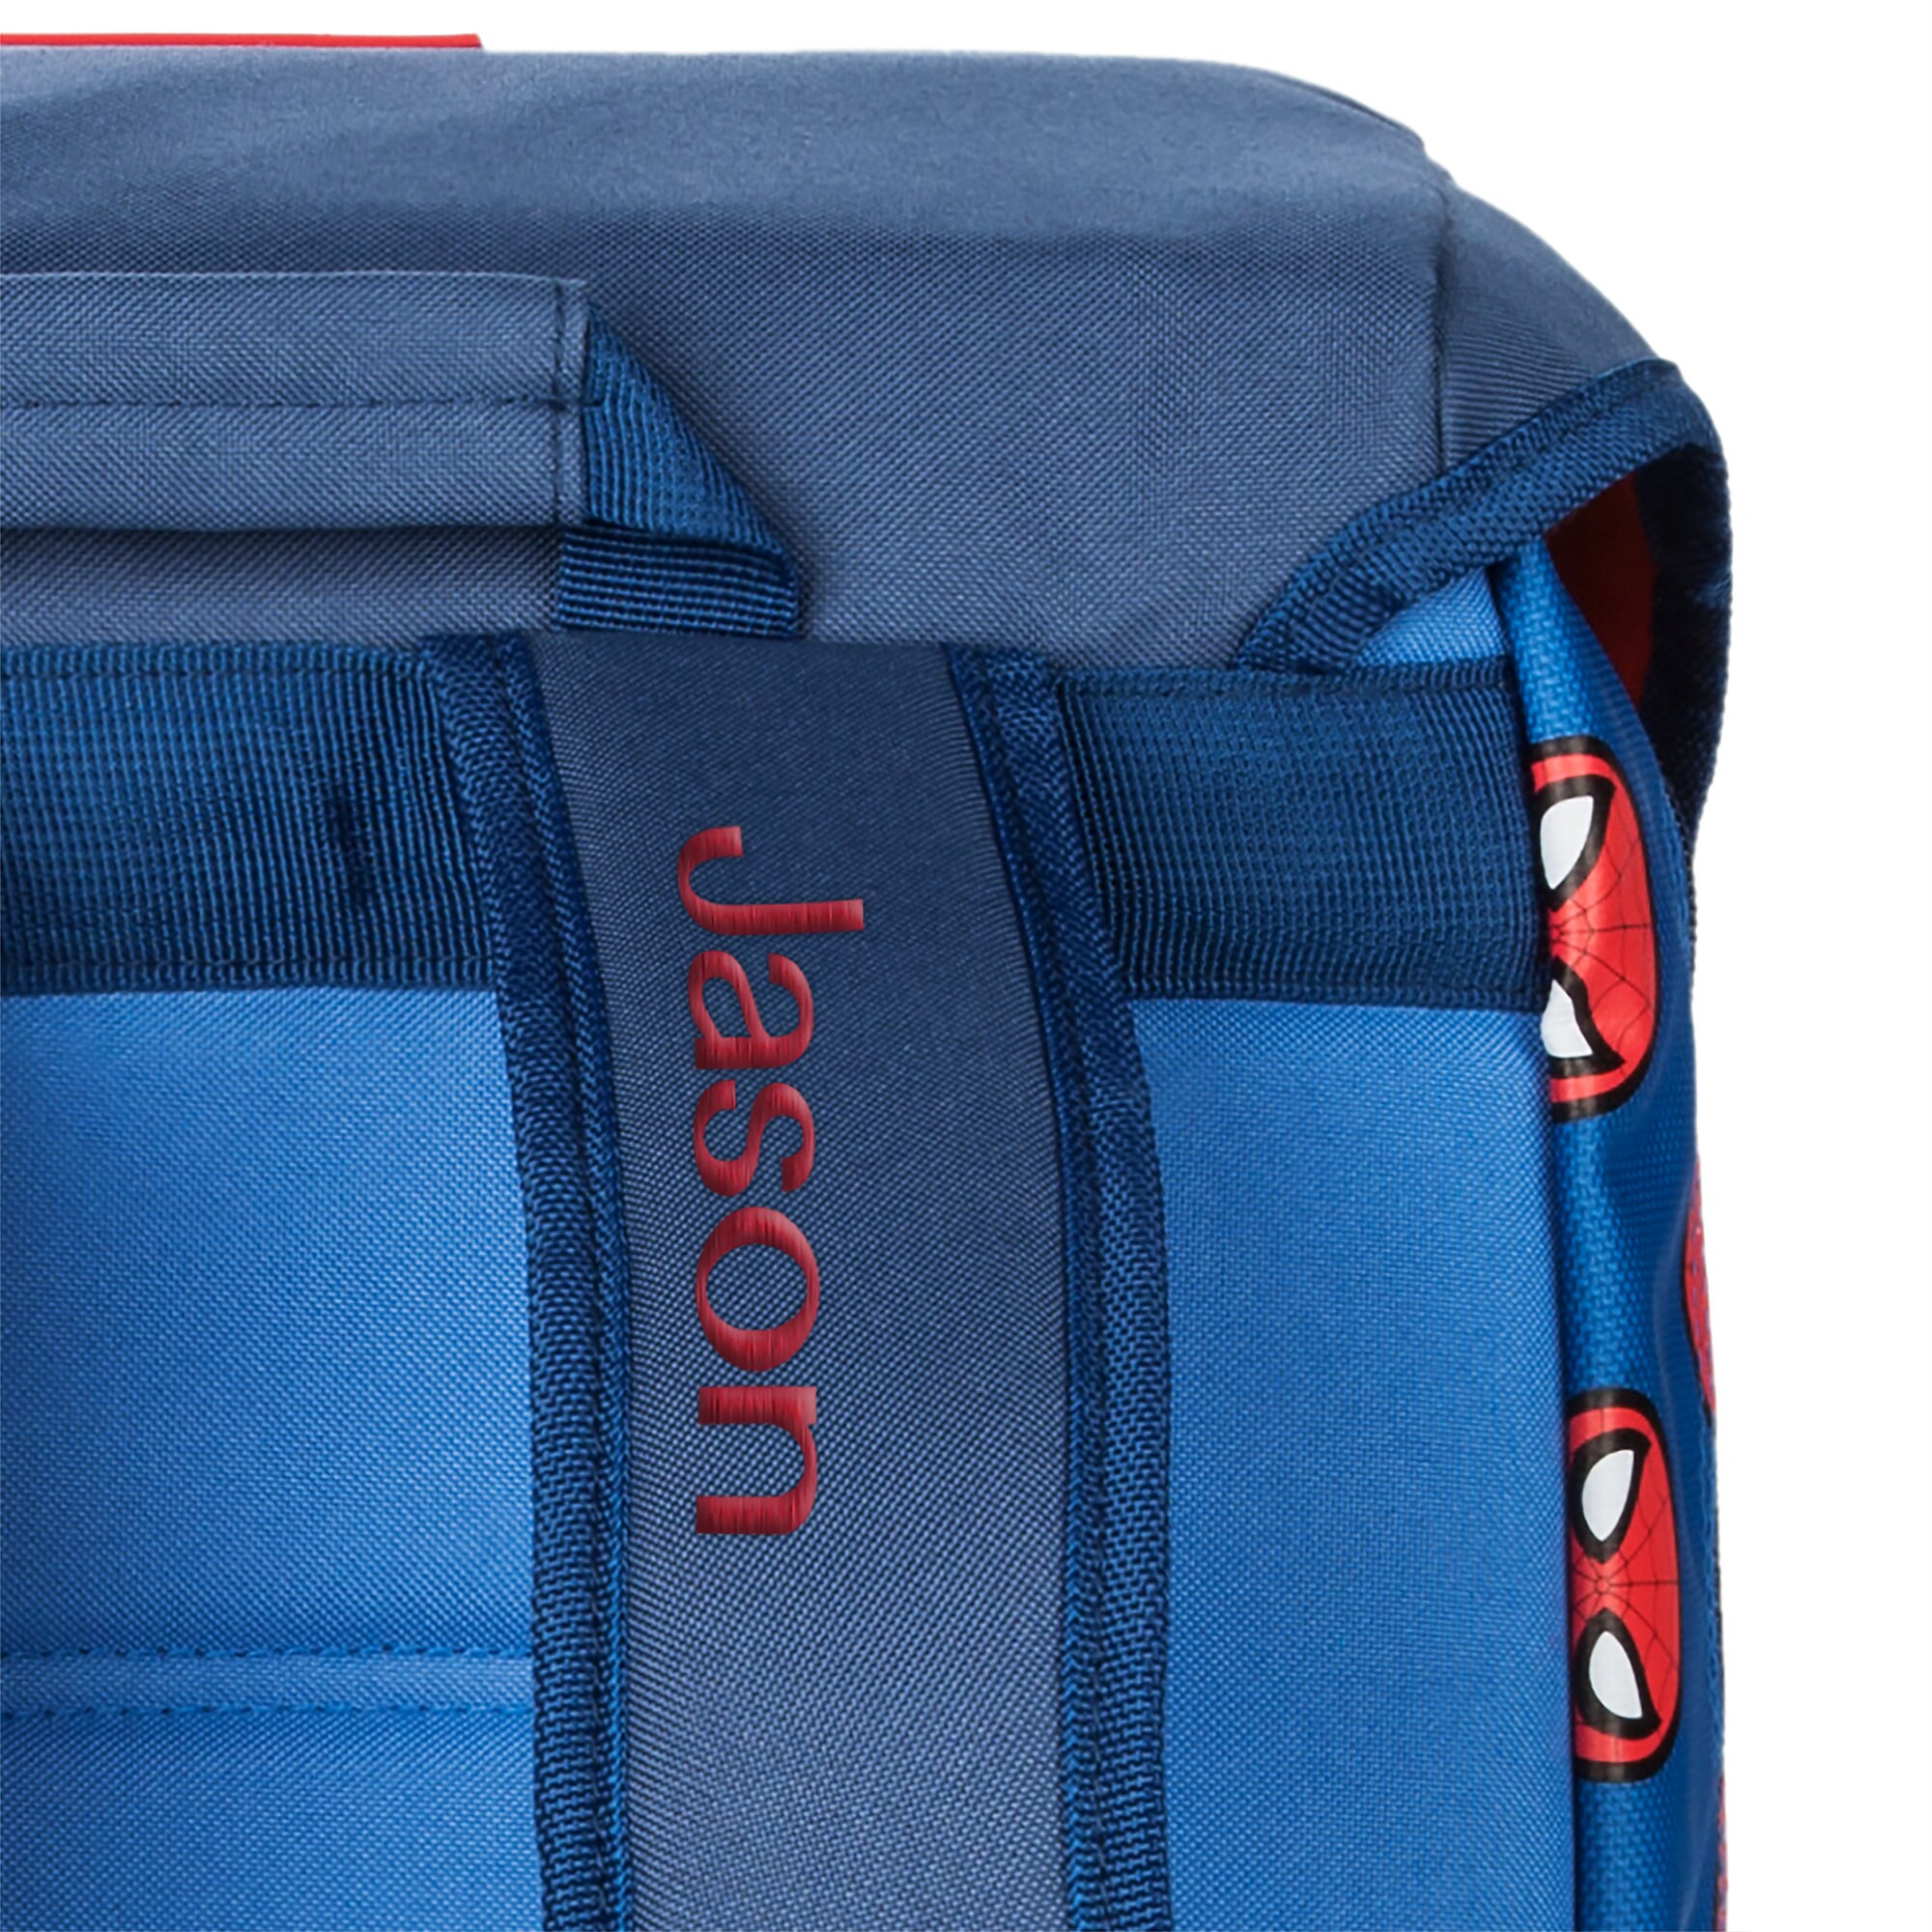 Spider-Man Backpack for Kids - Personalized